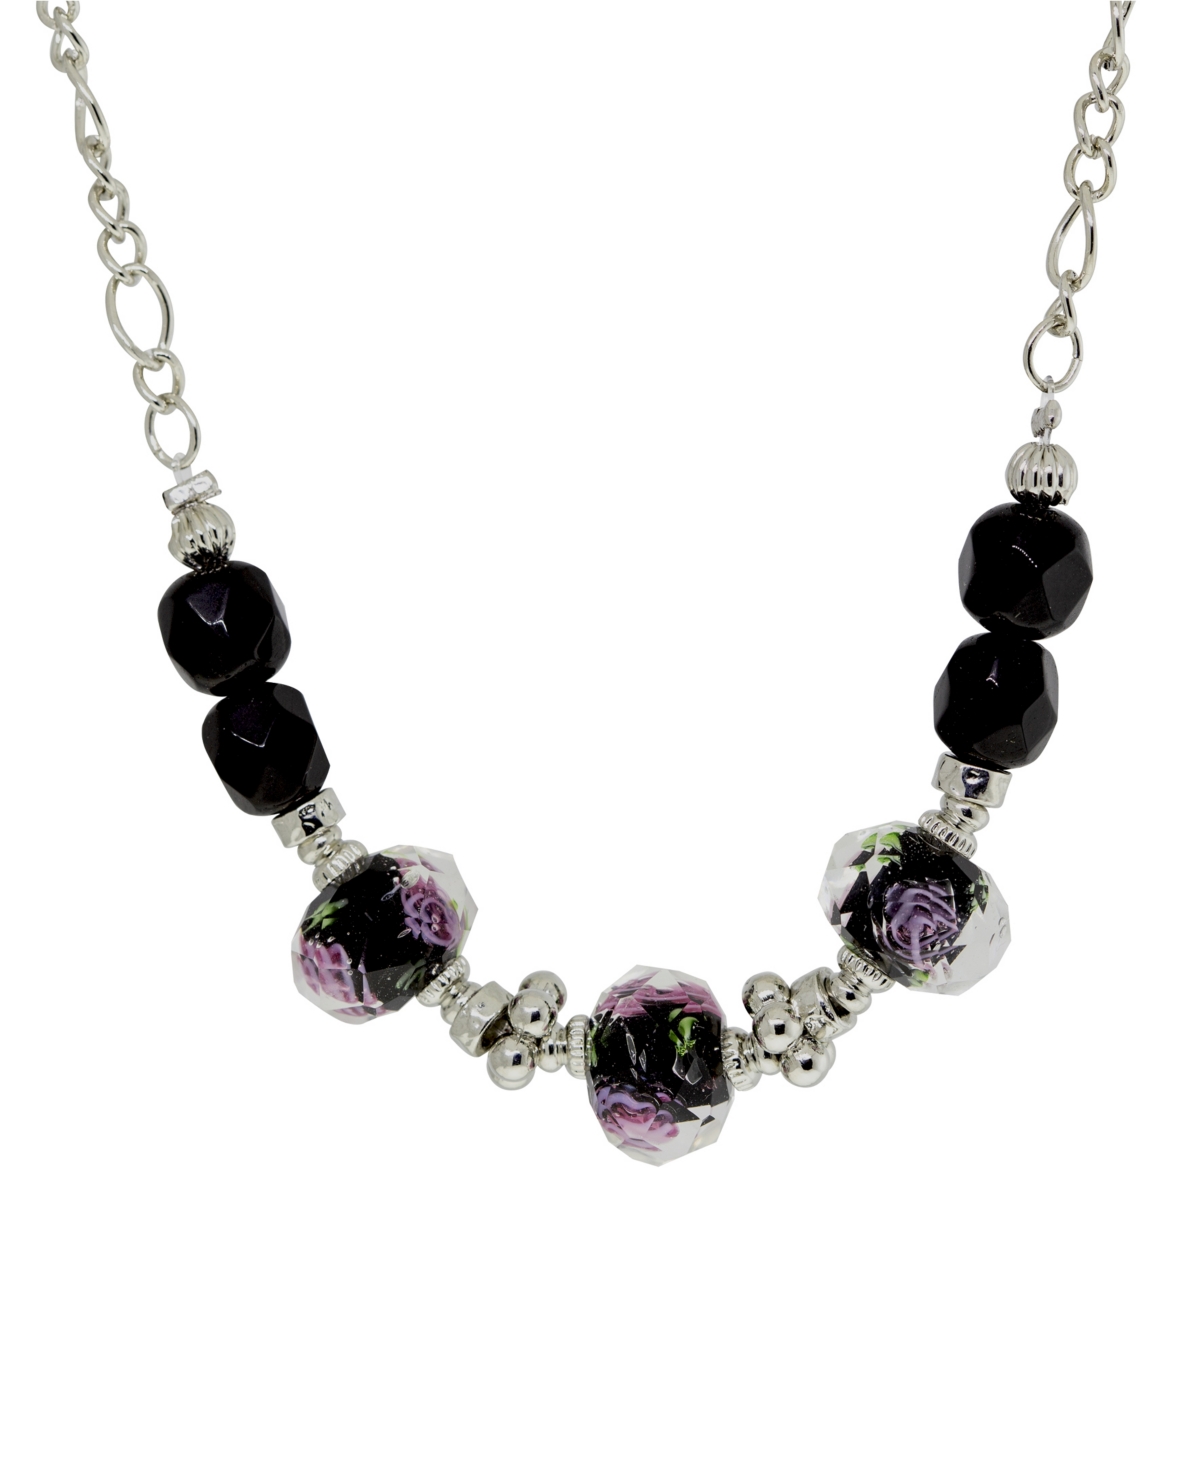 2028 Silver-tone Black Floral Beaded Necklace